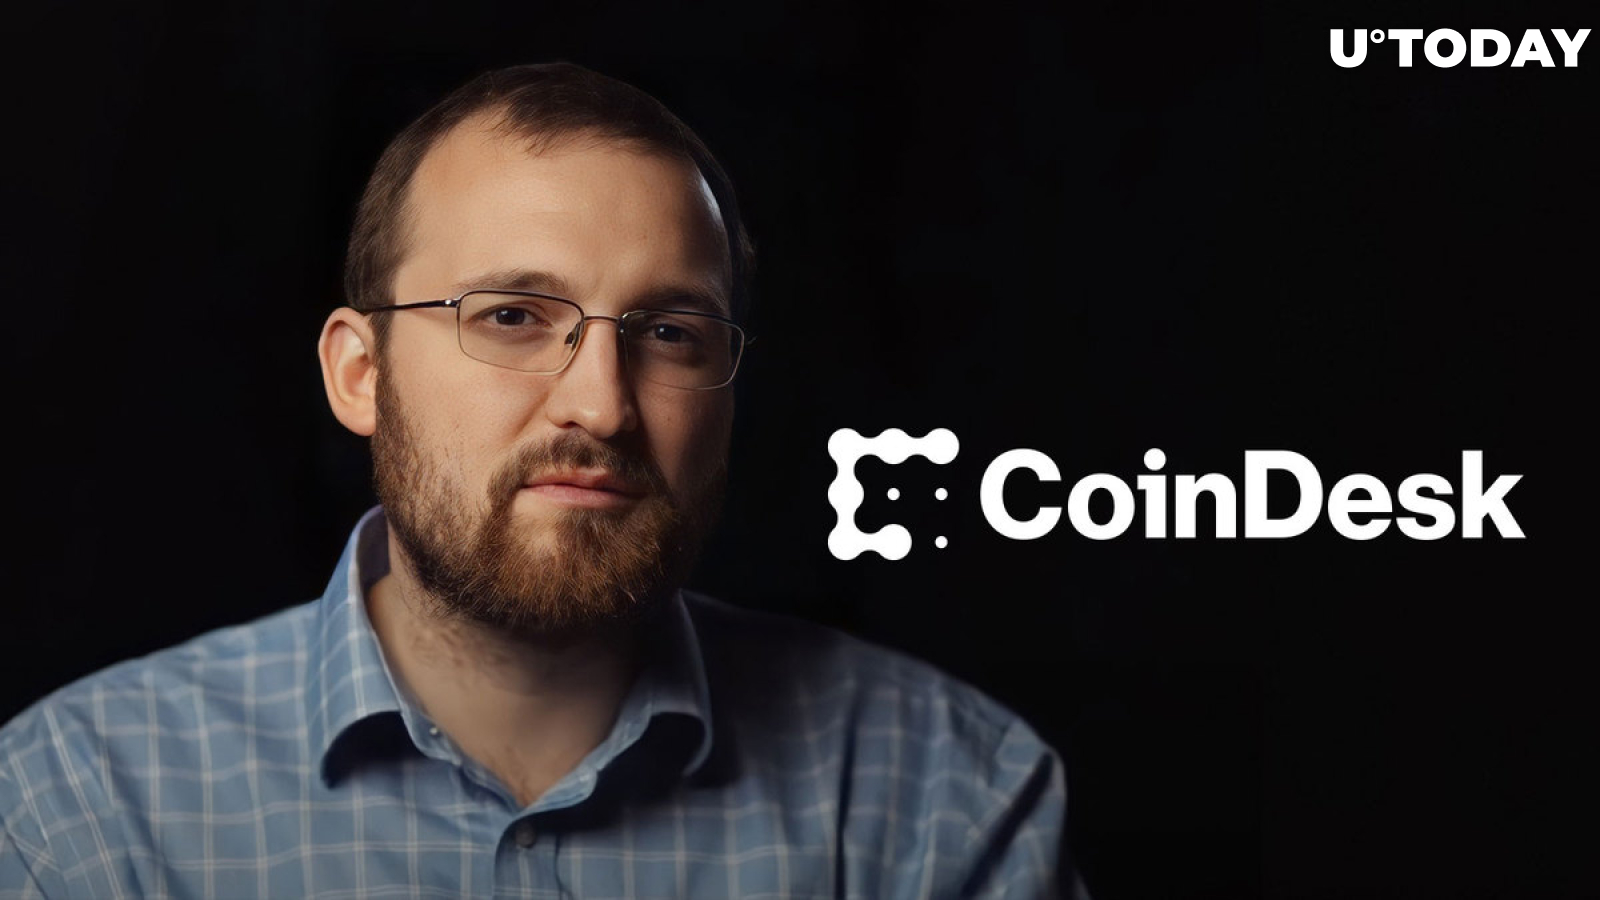 Is Cardano Founder Charles Hoskinson Making Bid for Coindesk?